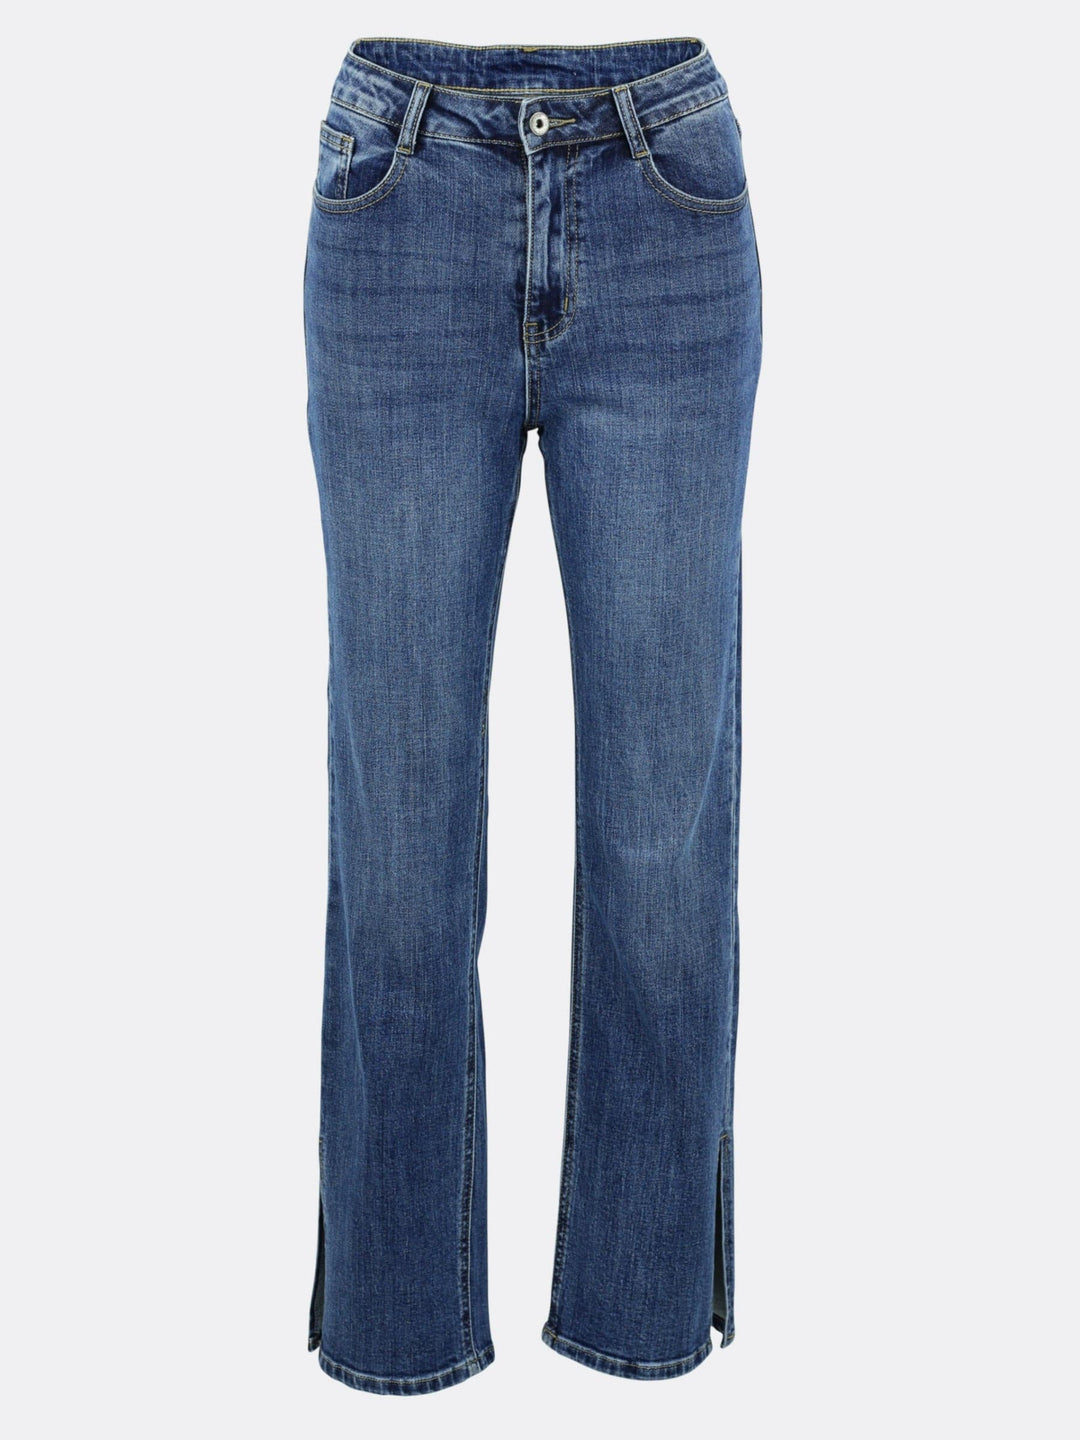 Jeans Denim High Rise Side Vents Blue Ghost